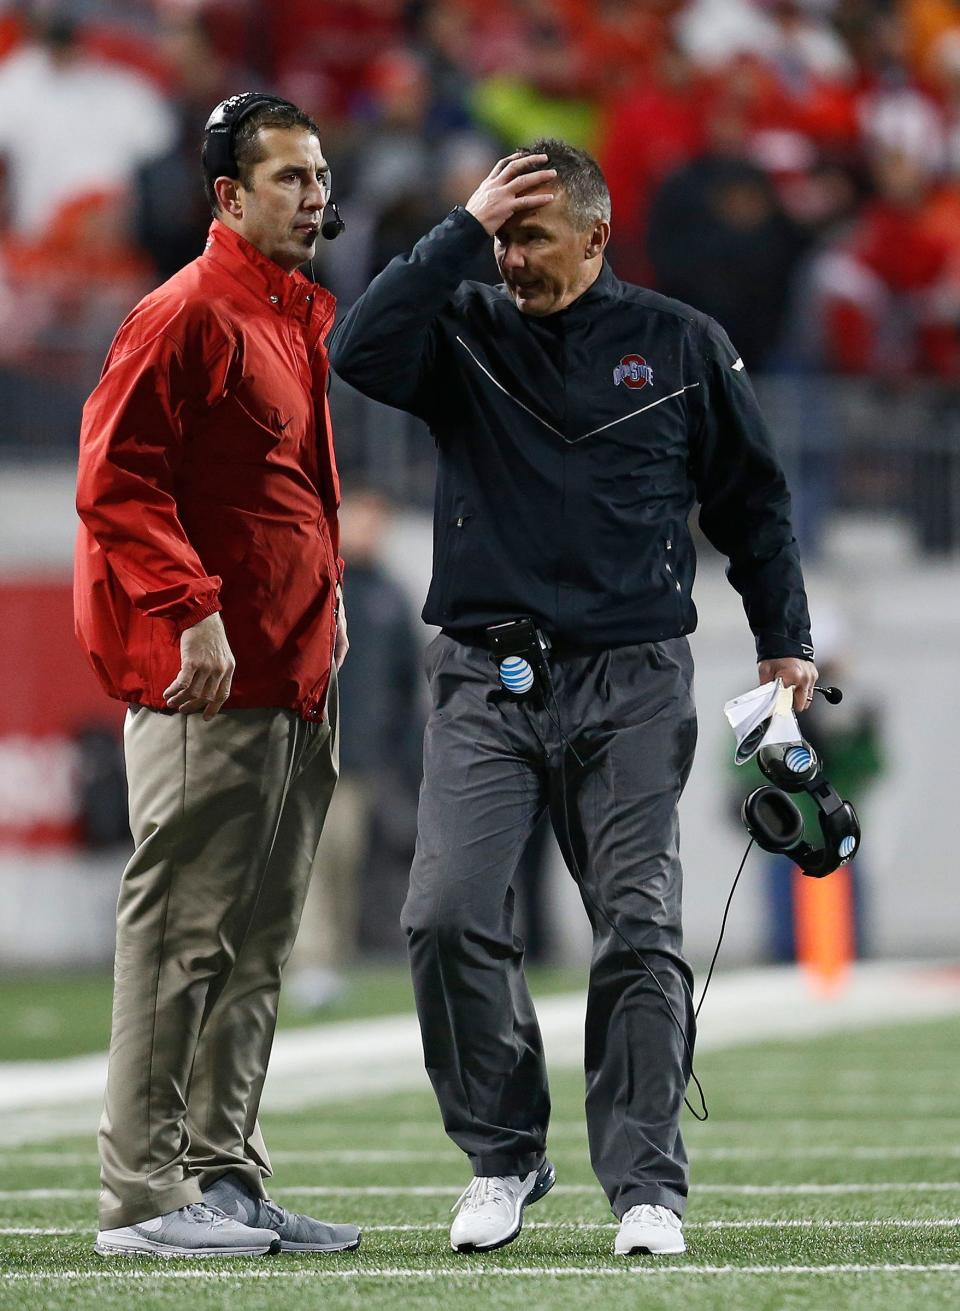 Ohio State Buckeyes head coach Urban Meyer walks past defensive coordinator Luke Fickell during the fourth quarter of the NCAA football game at Ohio Stadium in Columbus on Nov. 21, 2015. Michigan State won 17-14. (Adam Cairns / The Columbus Dispatch)